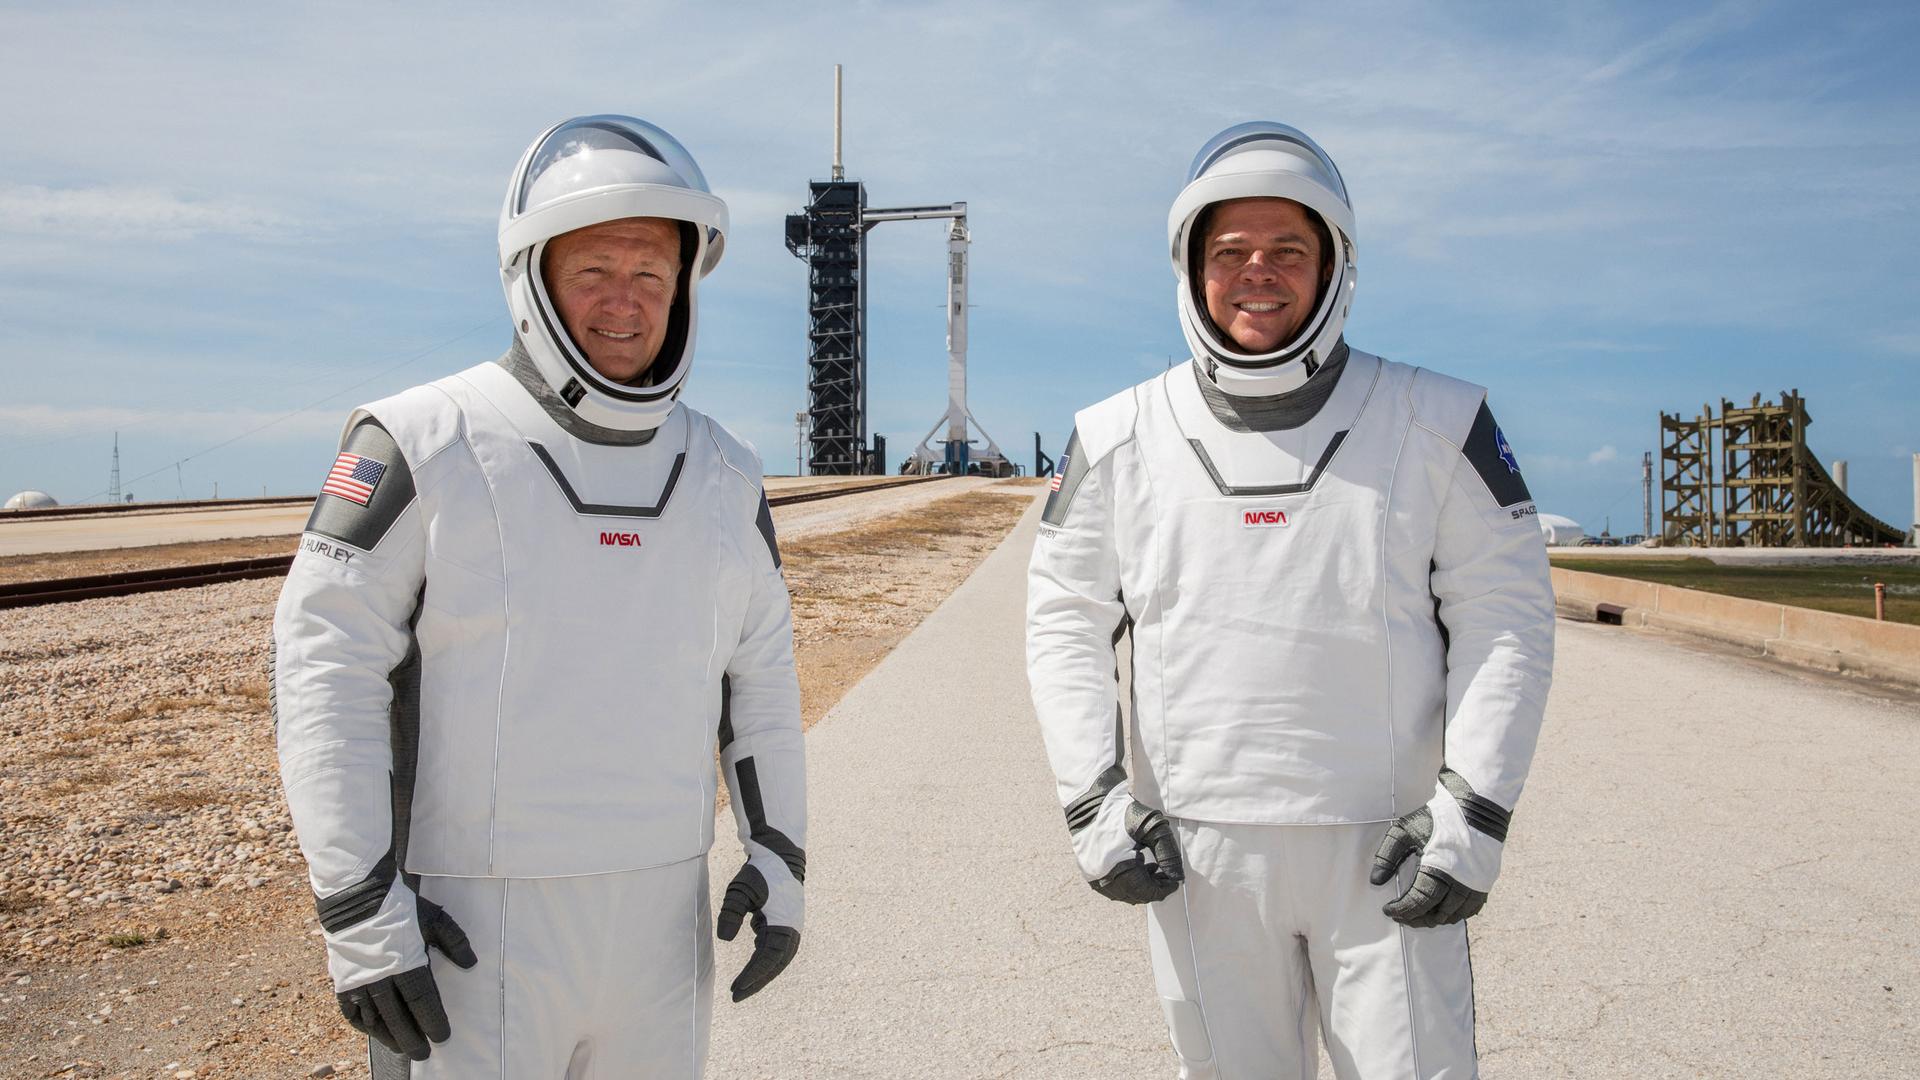 Two NASA astronauts in spacesuits in front of a rocket launch pad